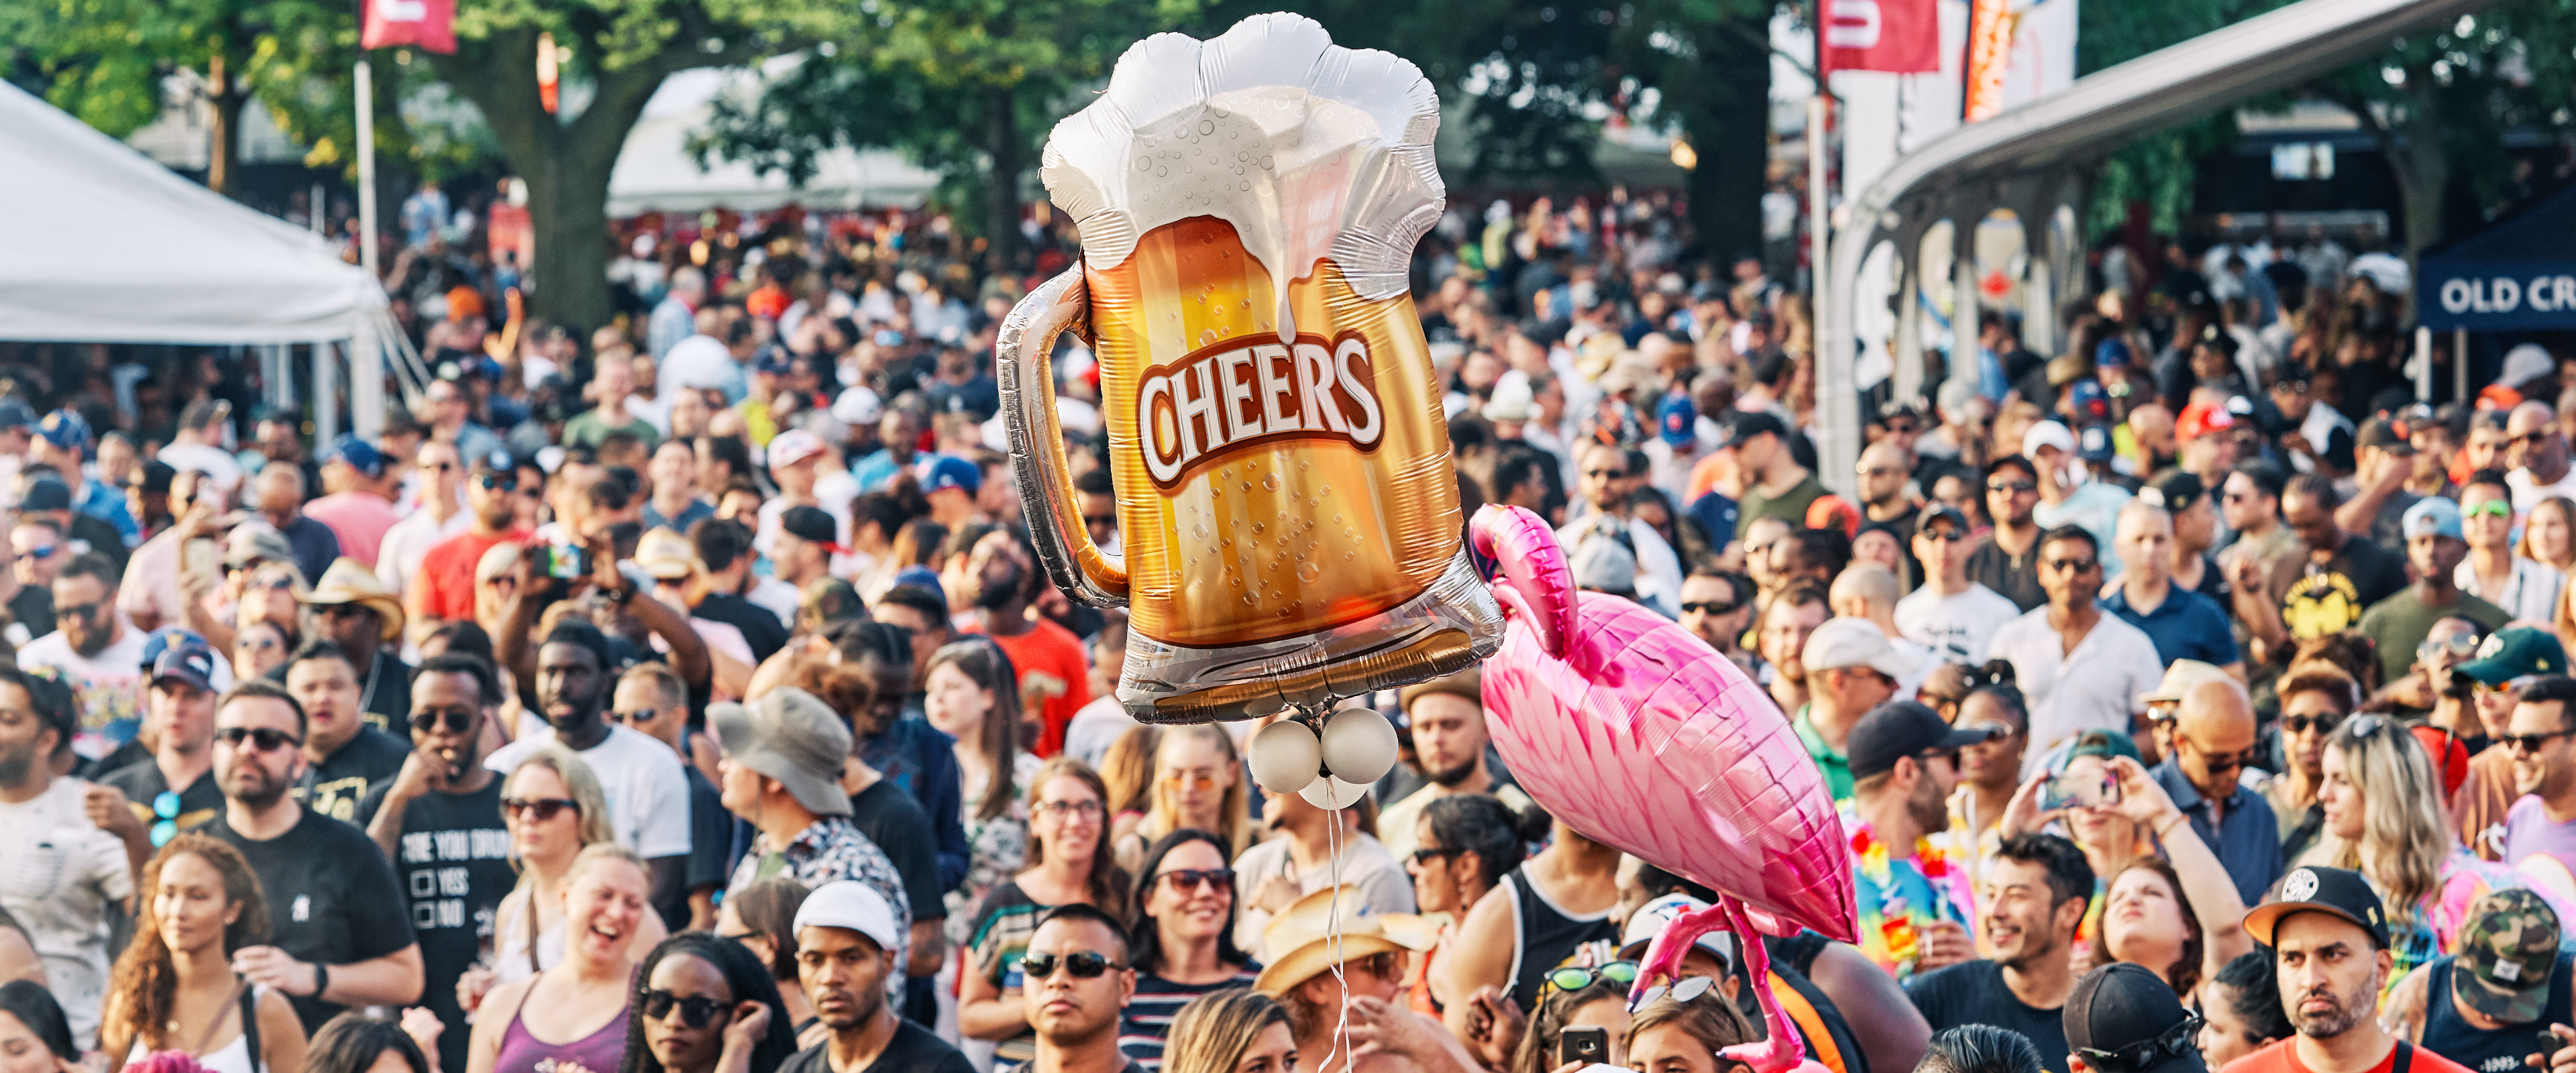 TORONTO’S <strong>BEERFEST</strong> RETURNS IN 2021